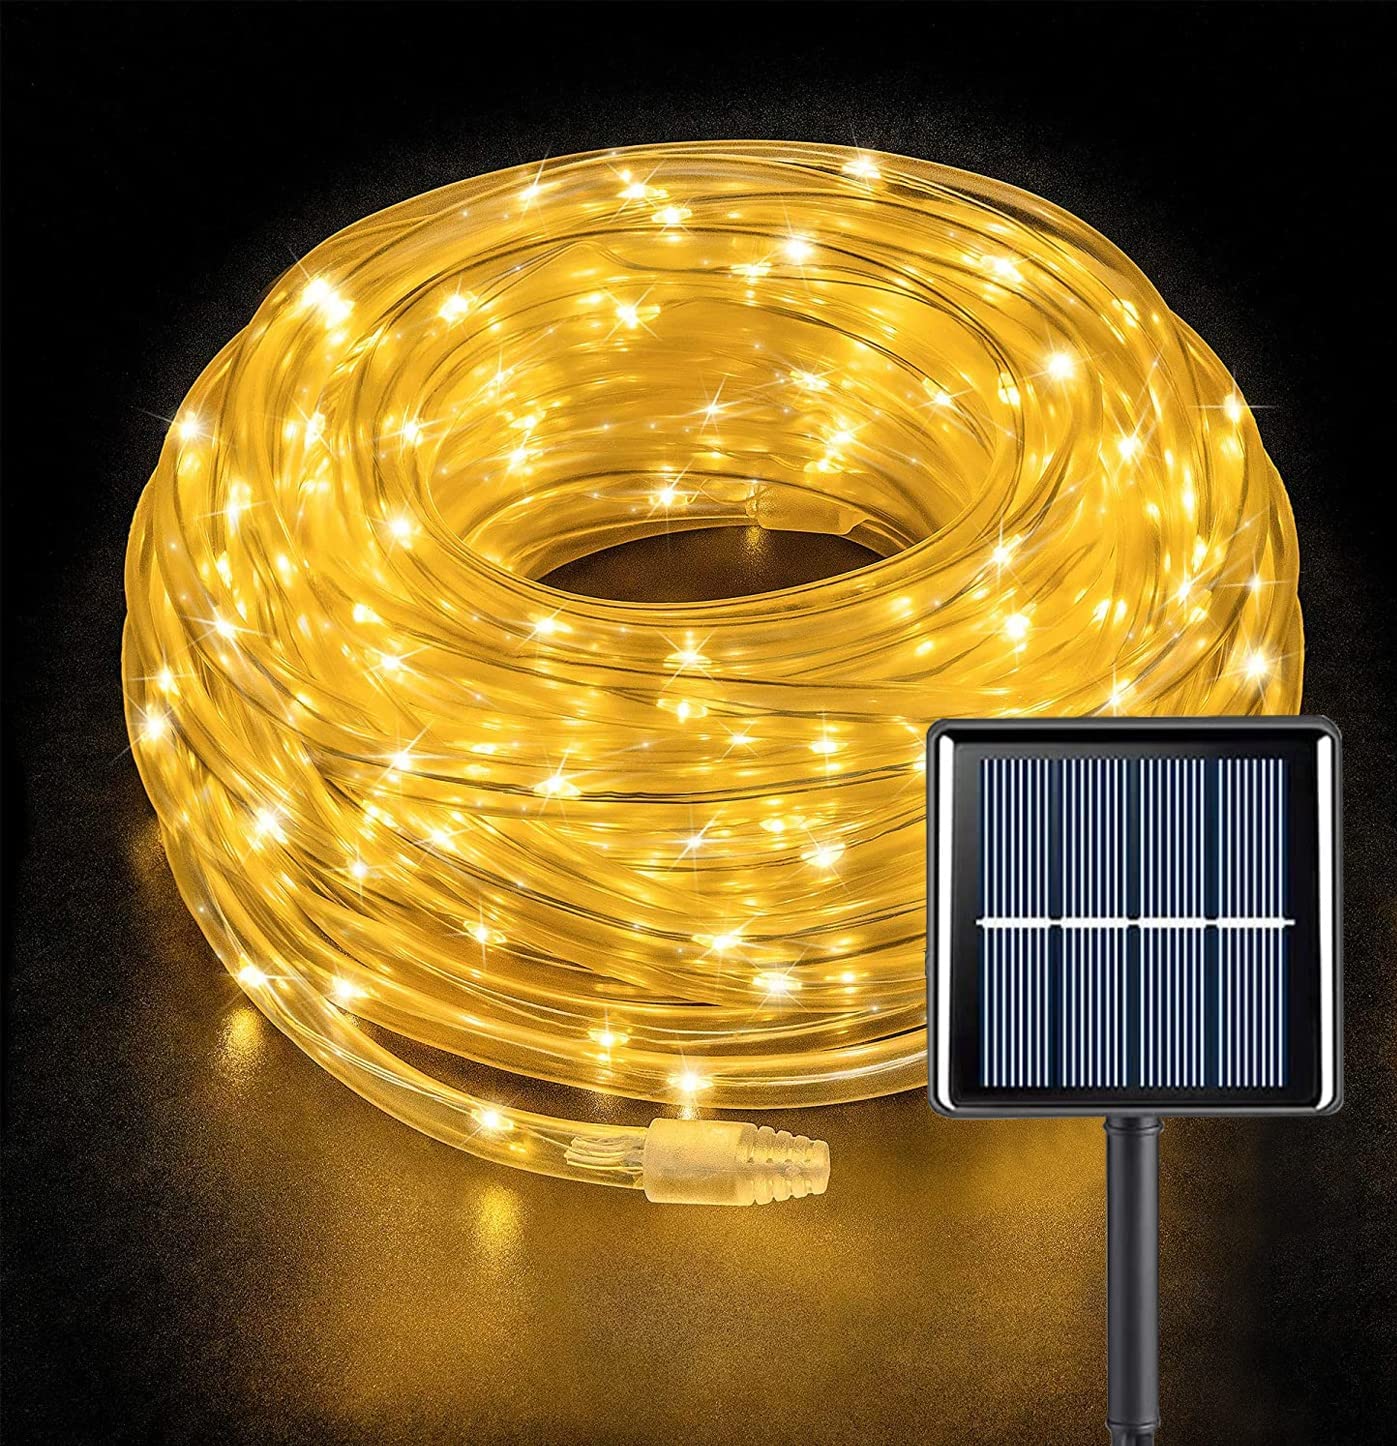 YEGUO Solar Rope Lights Outdoor Waterproof LED, 66ft 200 LED Rope Lights Outdoor, PVC Tube Warm White Fairy String Lights for Pool Balcony Tree Garden Yard Fence Deck Party Walkway Path